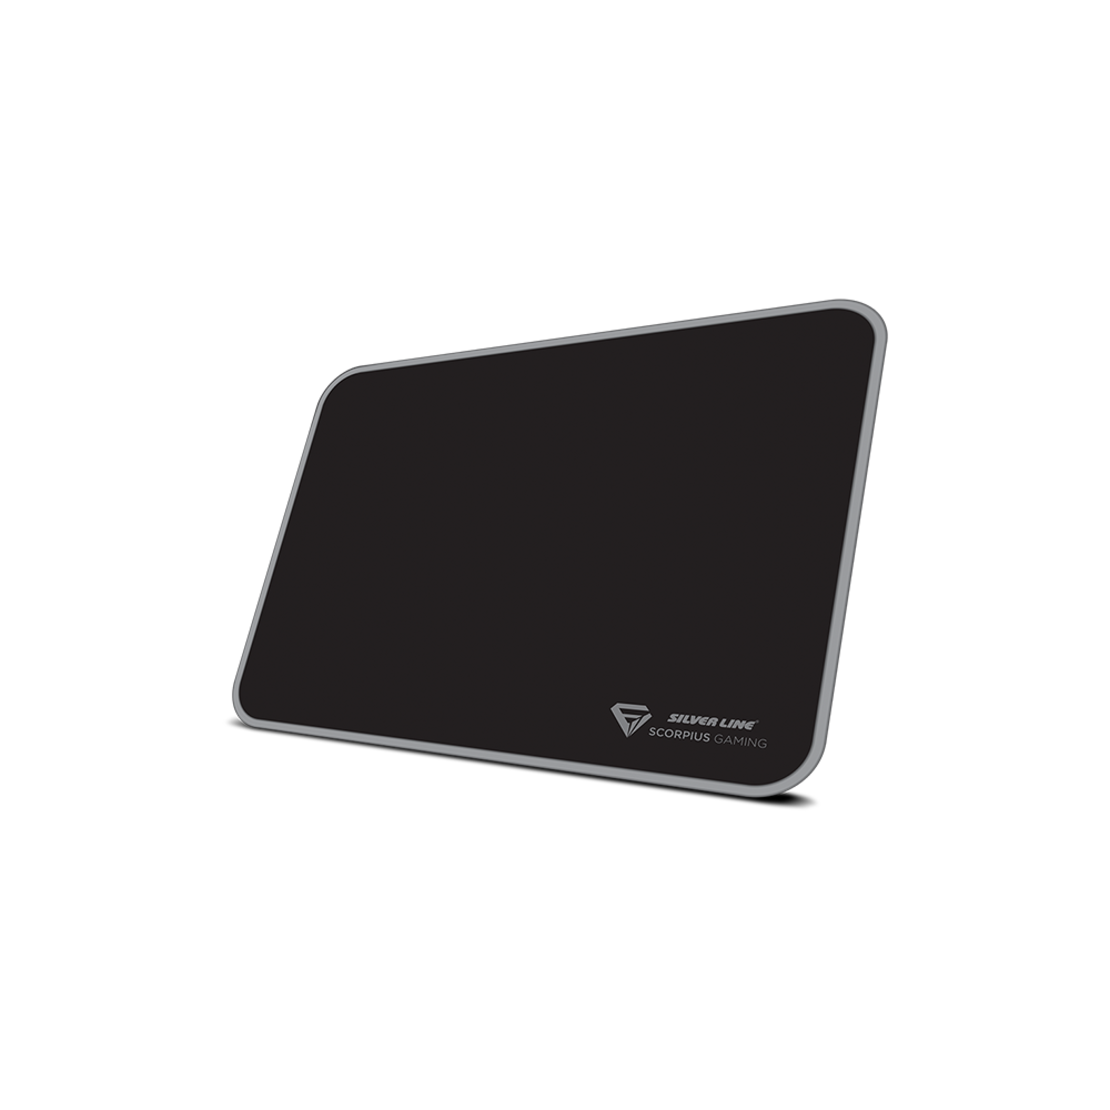 GAMING PAD mouse pad from SILVER LINE